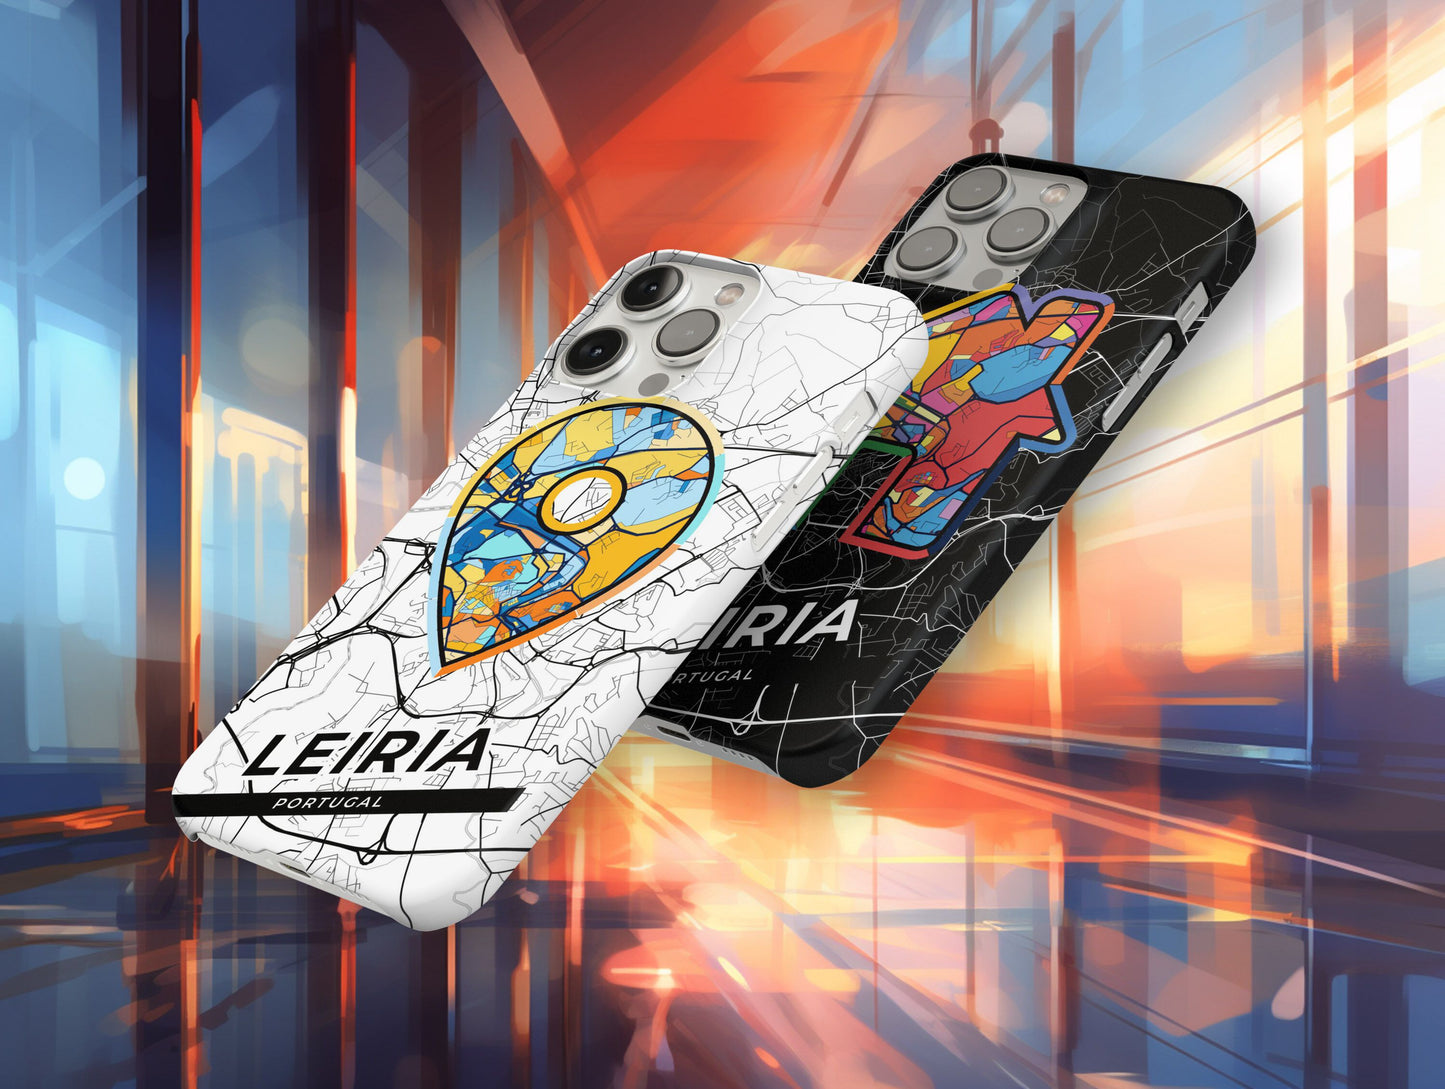 Leiria Portugal slim phone case with colorful icon. Birthday, wedding or housewarming gift. Couple match cases.